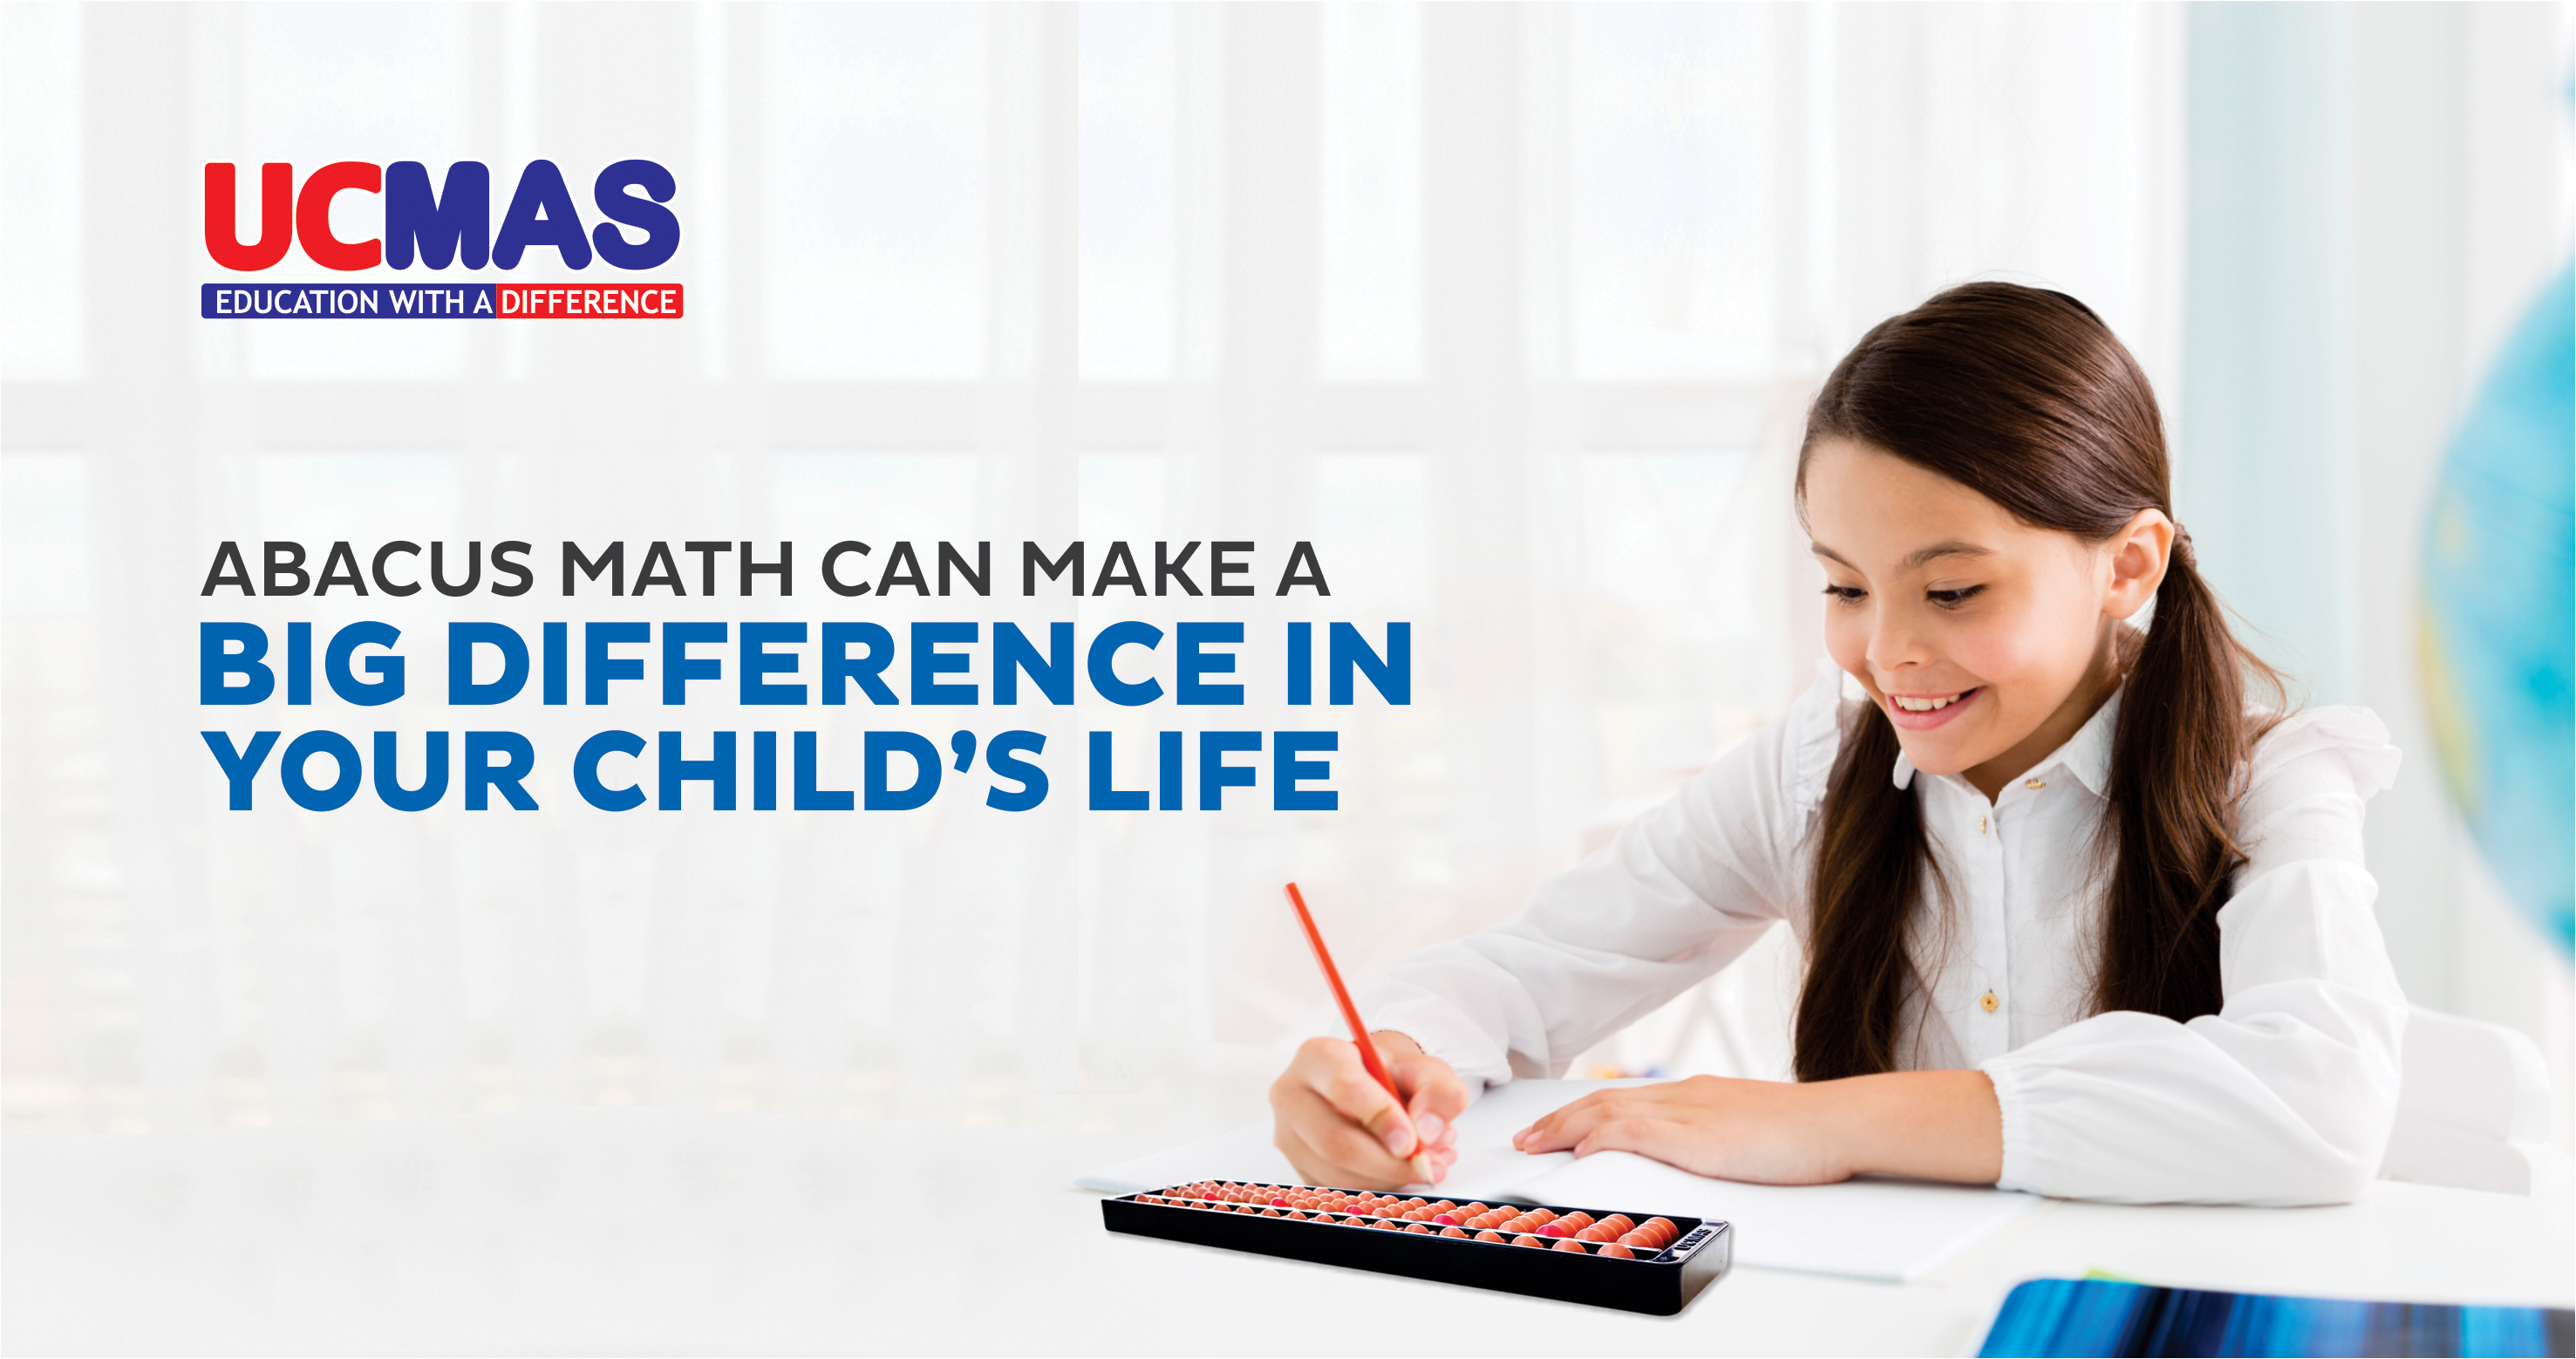 Discover what makes mental math or Abacus math important for your child. Visit UCMAS Abacus Classes for more info.